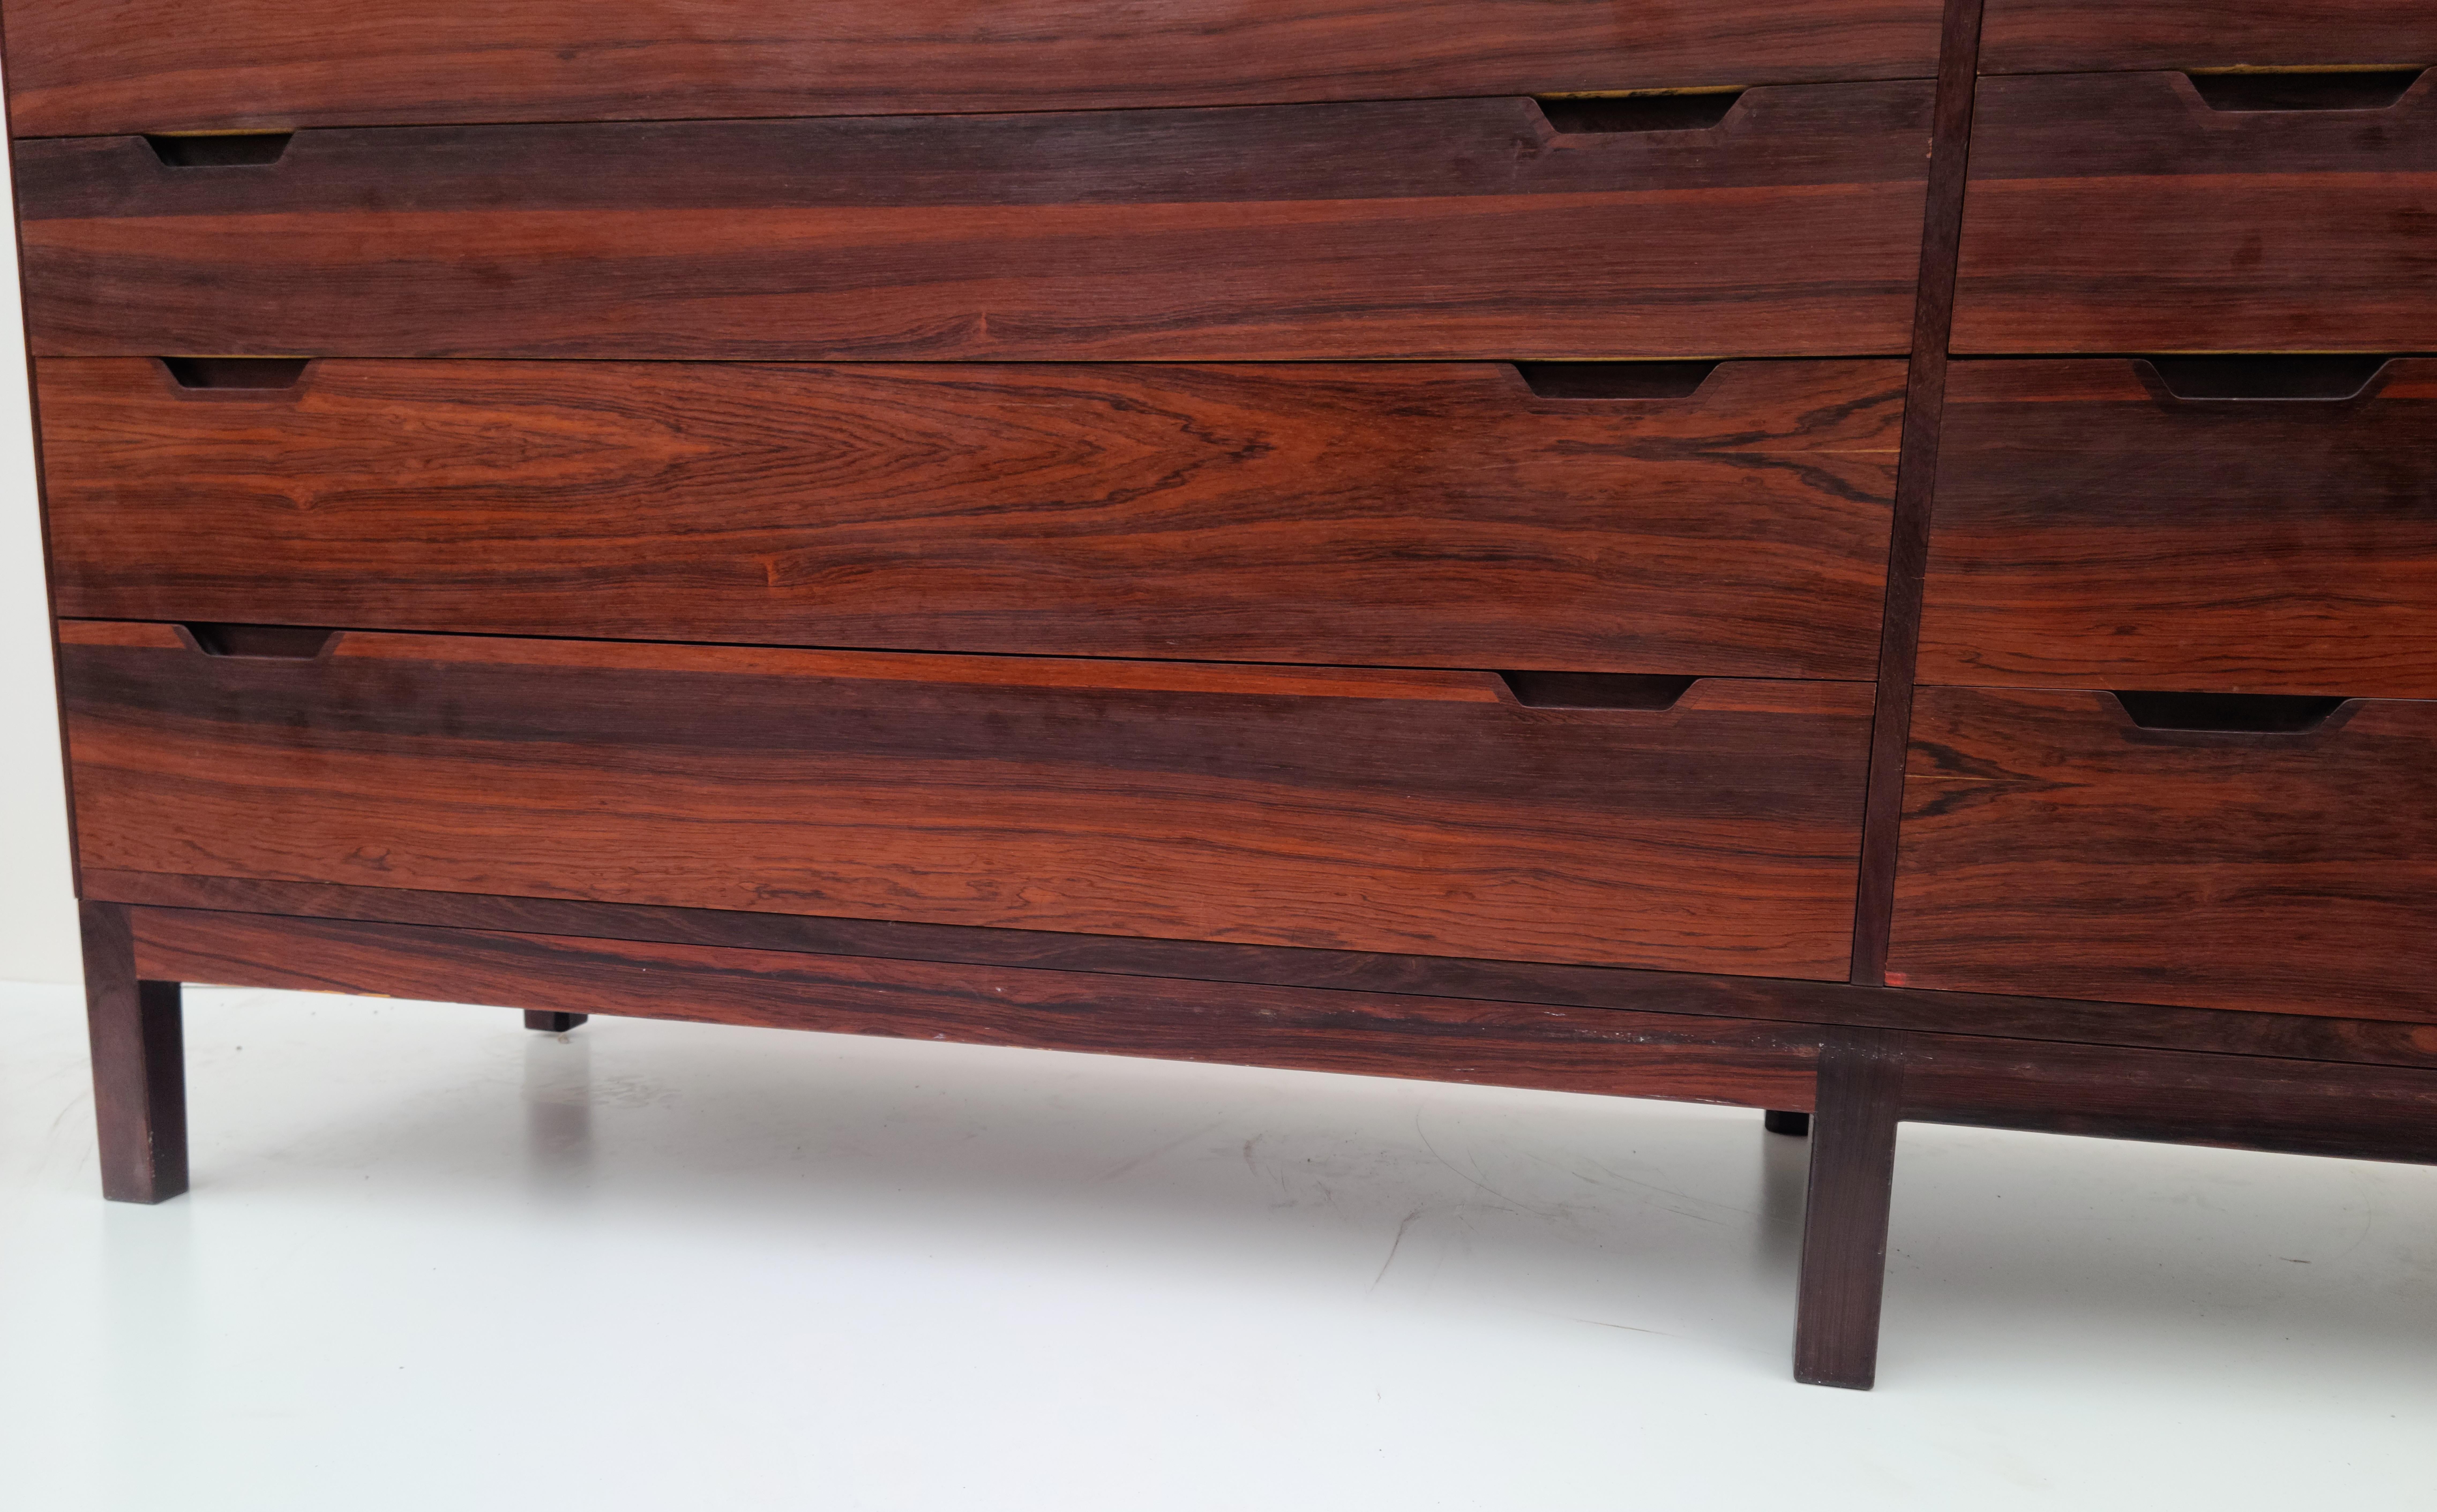 Please feel free to reach out for accurate shipping quote to your location.

Long Rosewood 8 drawer dresser designed by Svend Langkilde.
Made in Denmark by Langkilde Mobler.